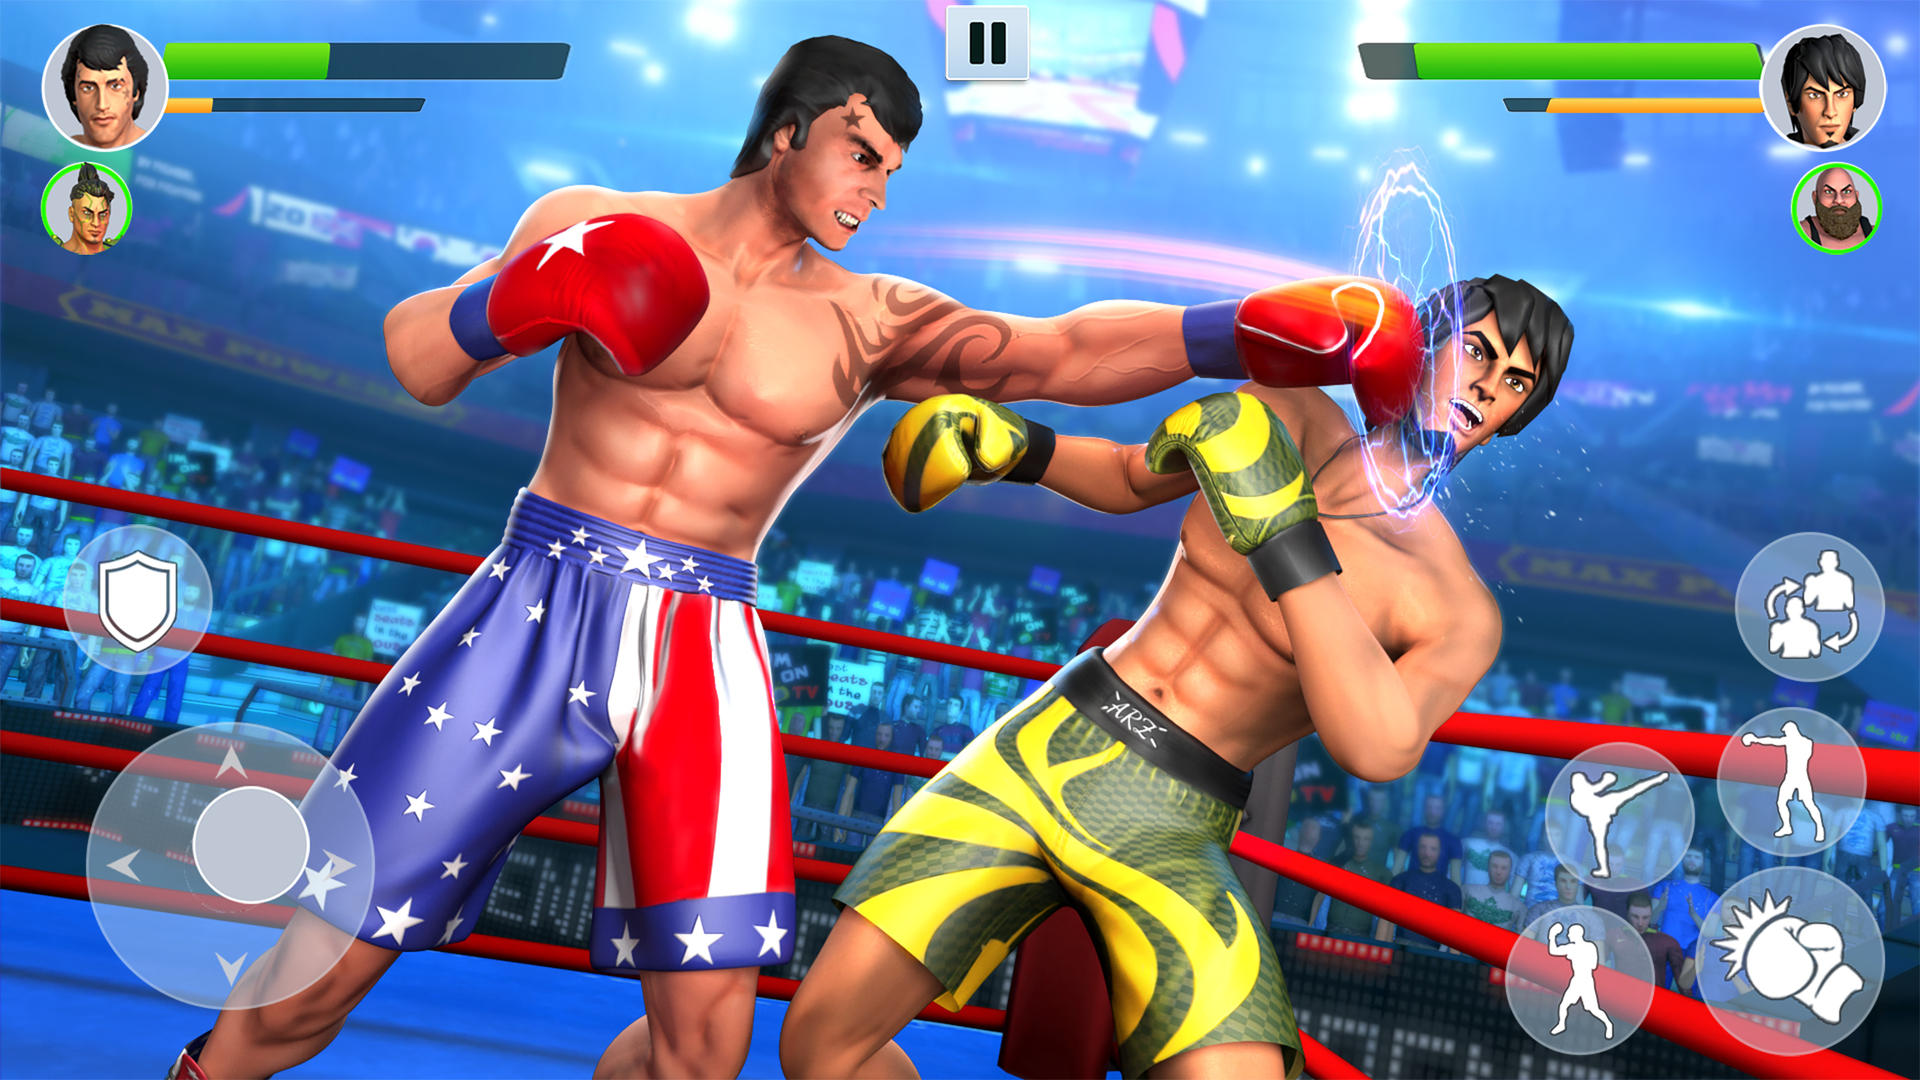 Tag Boxing Games: Punch Fightのキャプチャ